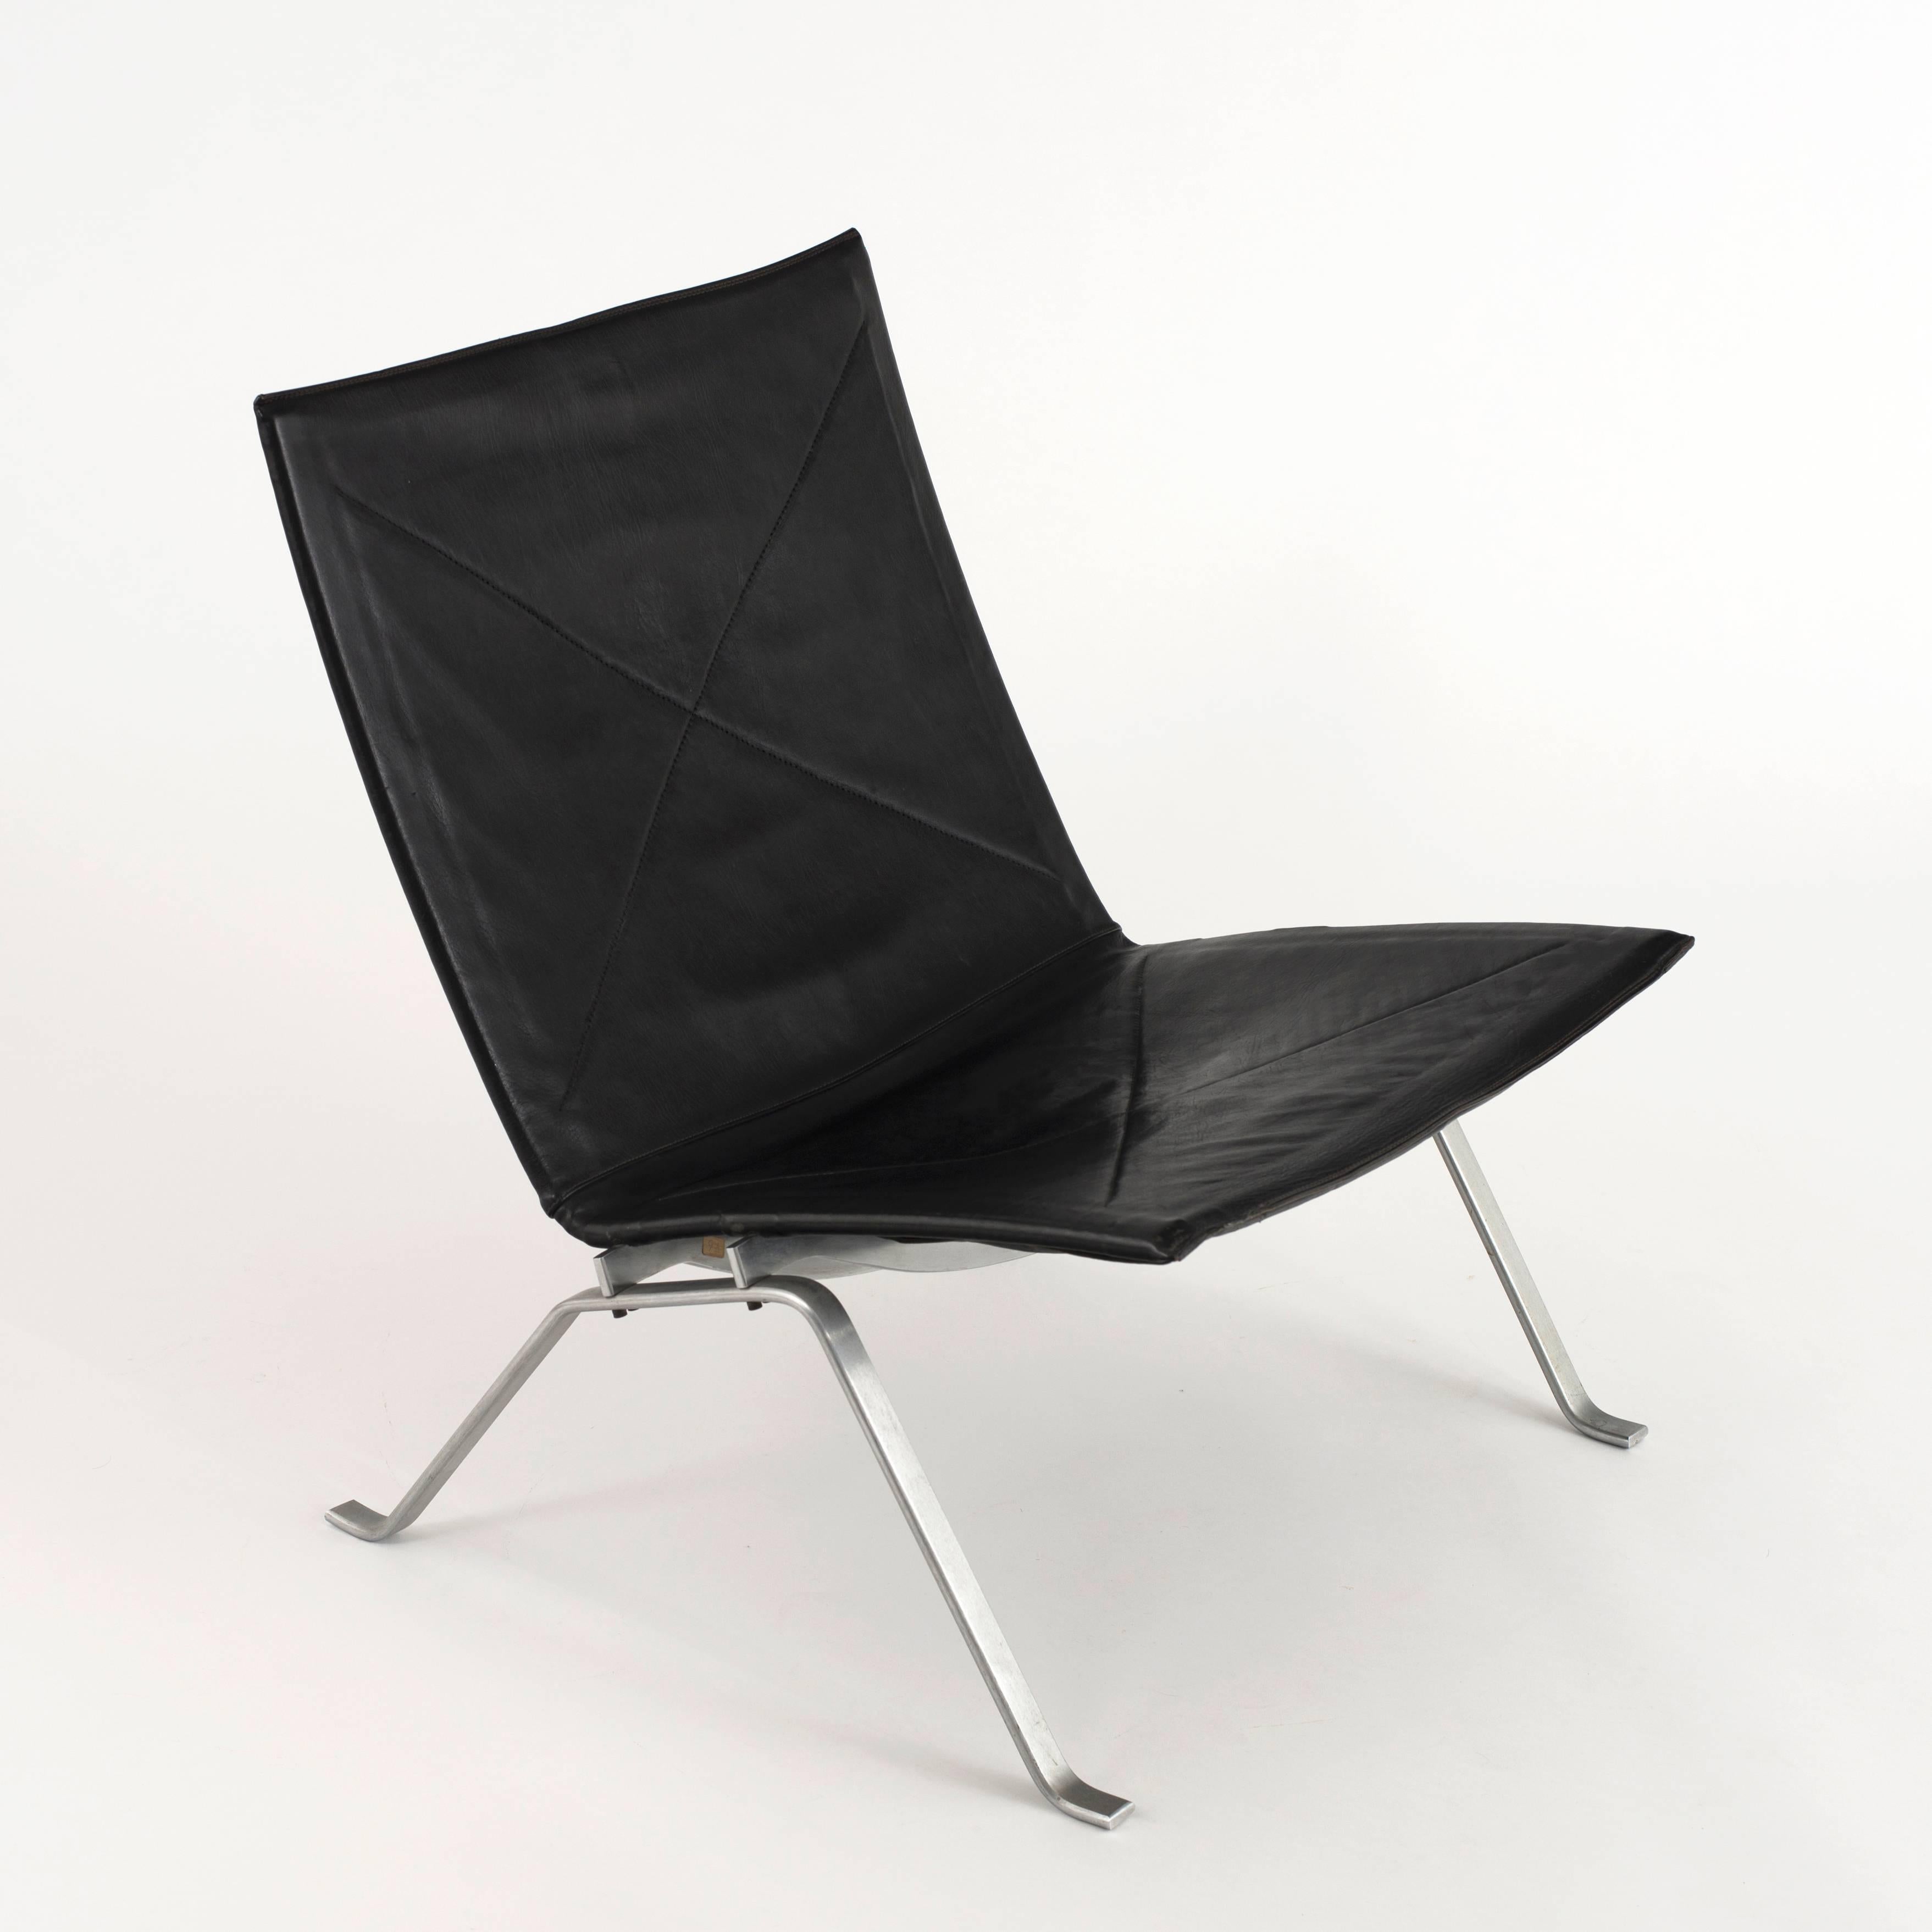 Poul Kjærholm model PK22, 1956. Executed by E. Kold Christensen, Denmark. 

Dull chromium-plated steel and original black leather.

Two chairs available.